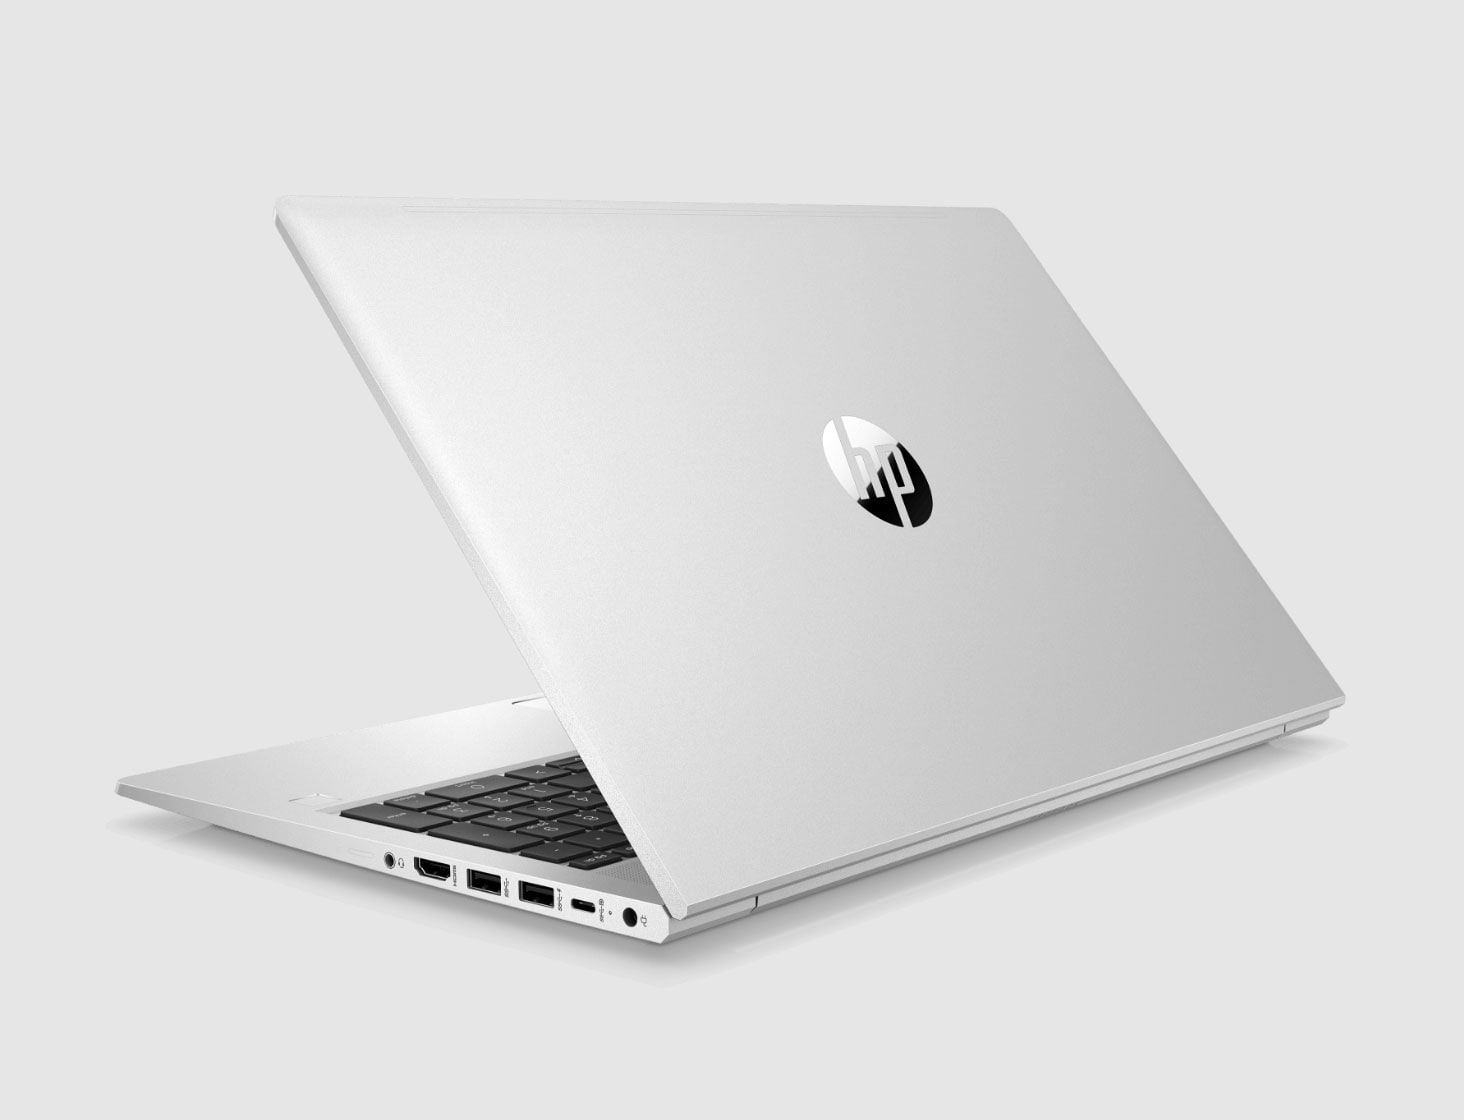 In Stock HP ProBook 450 | HP® Official Store